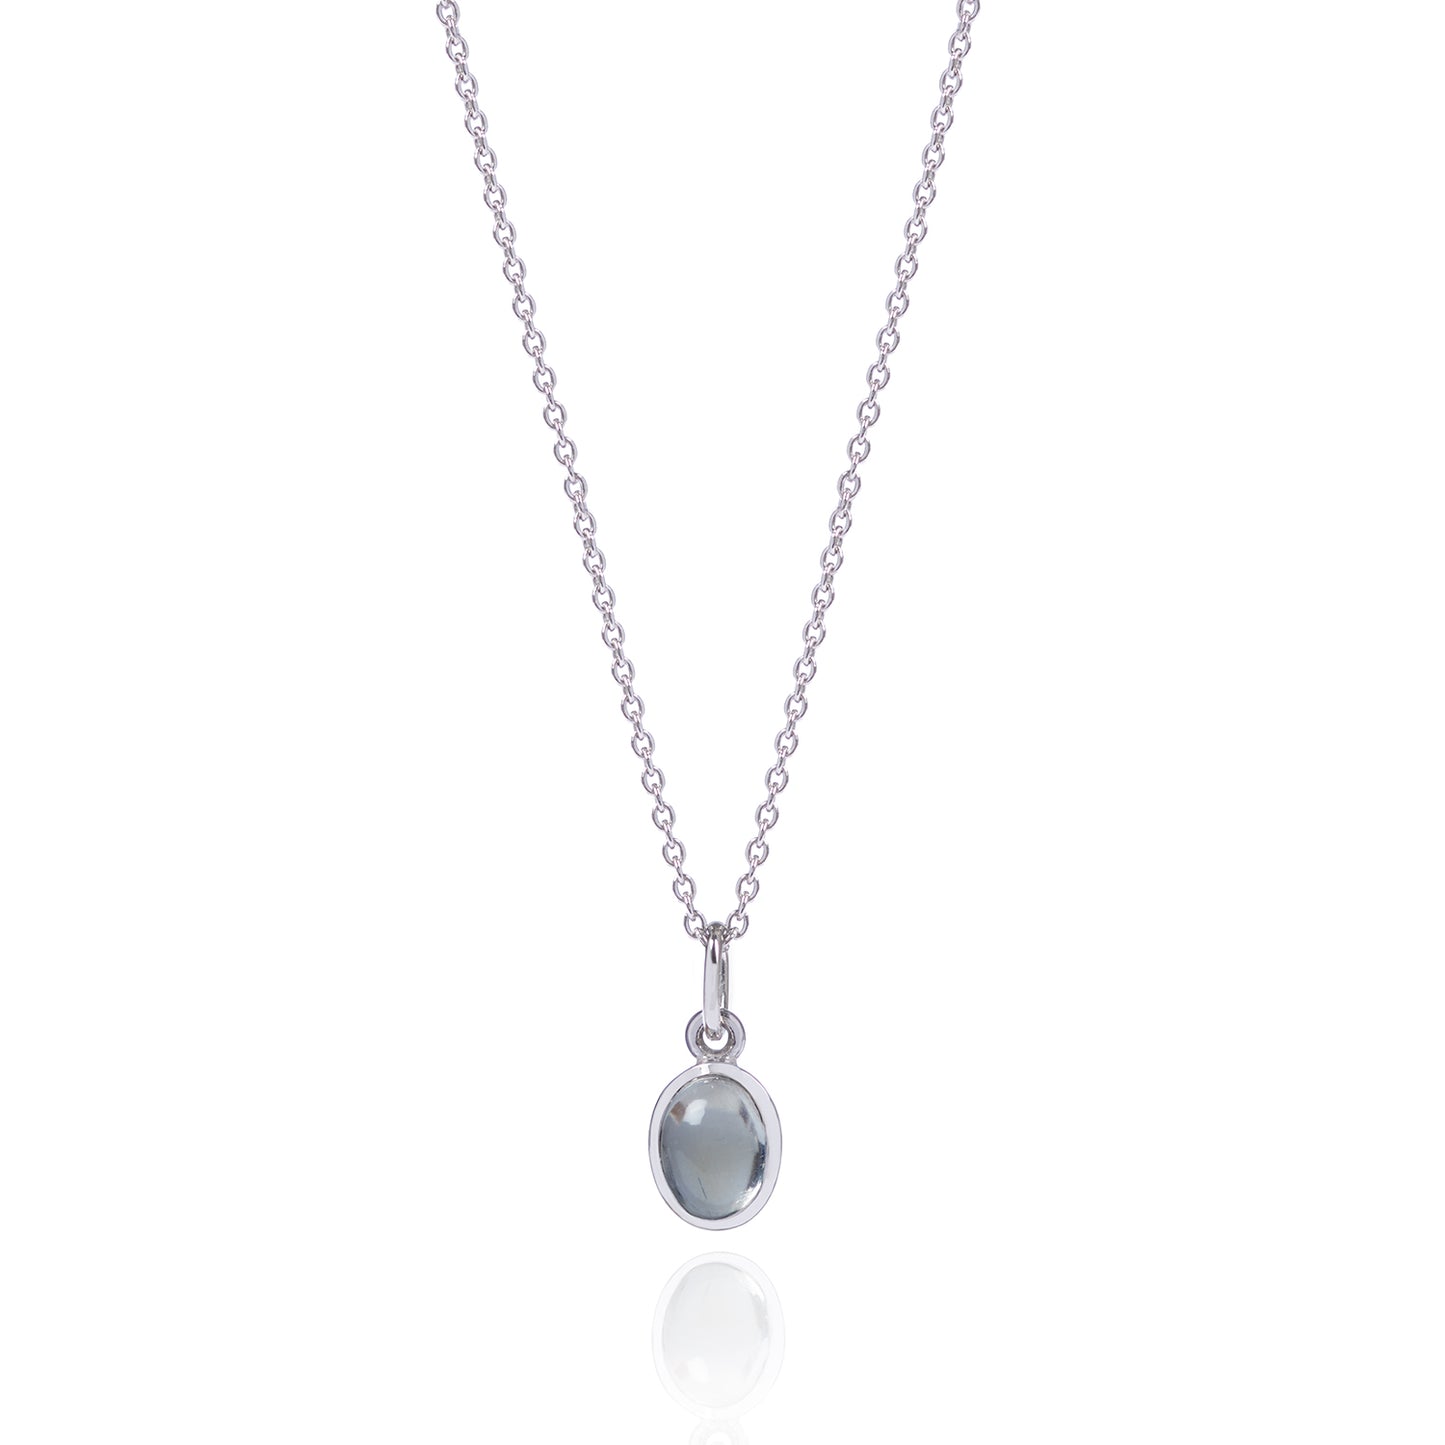 Moonstone Necklace in 18ct white gold by McFarlane Fine Jewellery